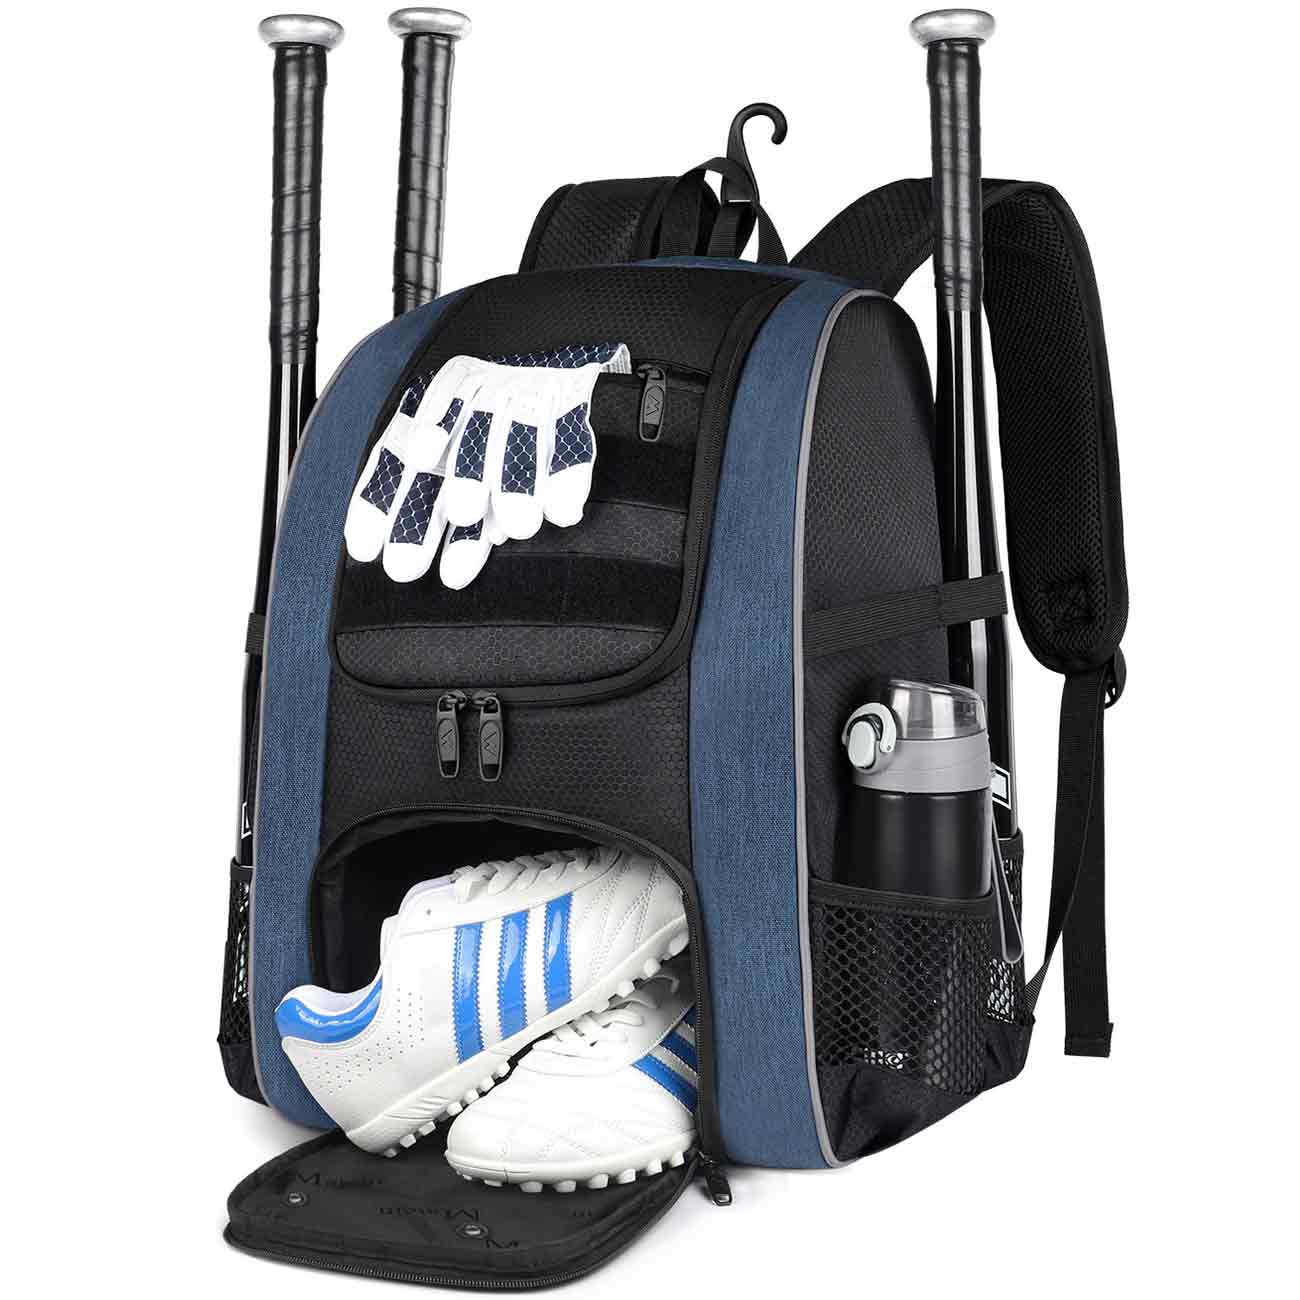 Caps Boys and Adult Batting Mitten MATEIN Baseball Backpack Lightweight Baseball Bag with Fence Hook Hold TBall Bat Softball Bat Bag with Shoes Compartment for Youth Helmet Teeball Gear 